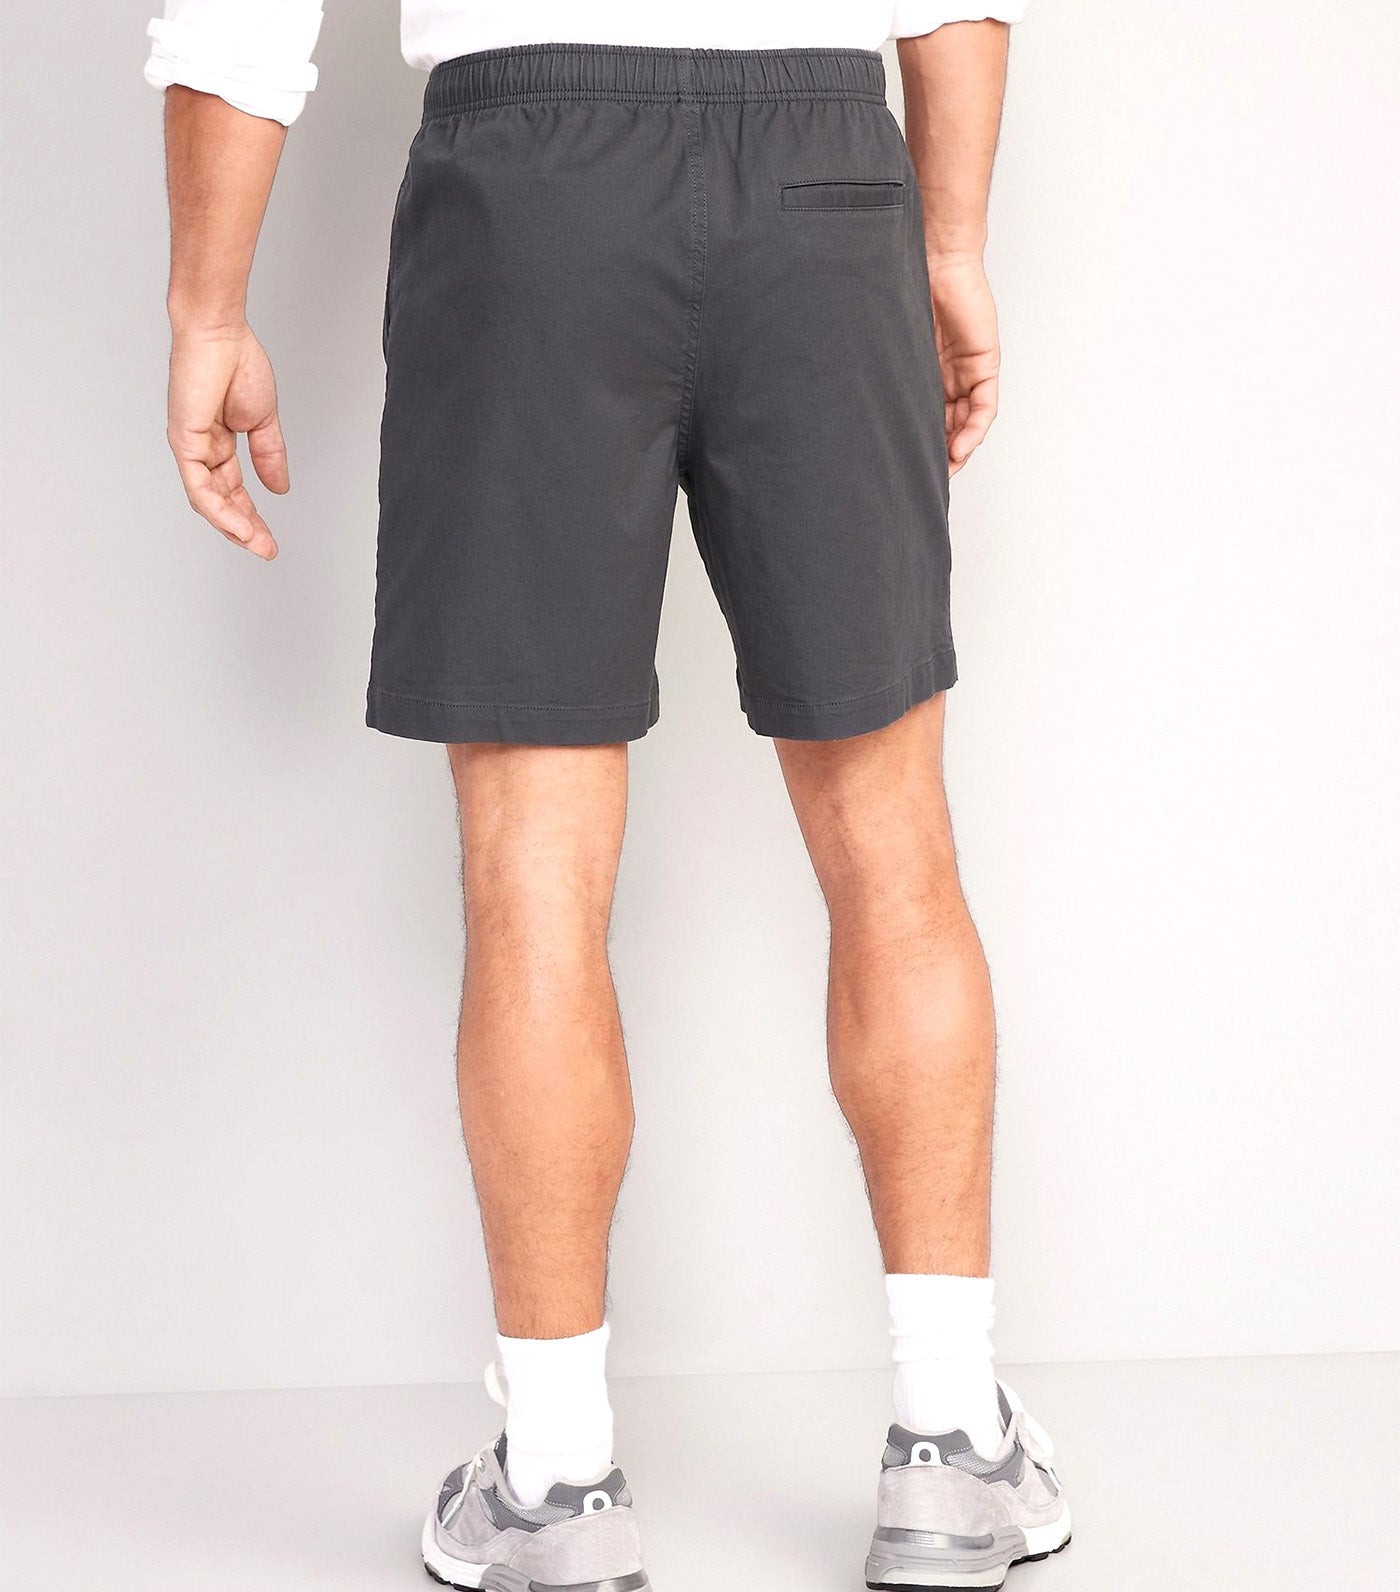 Pull-On Chino Jogger Shorts for Men 7-Inch Inseam Panther